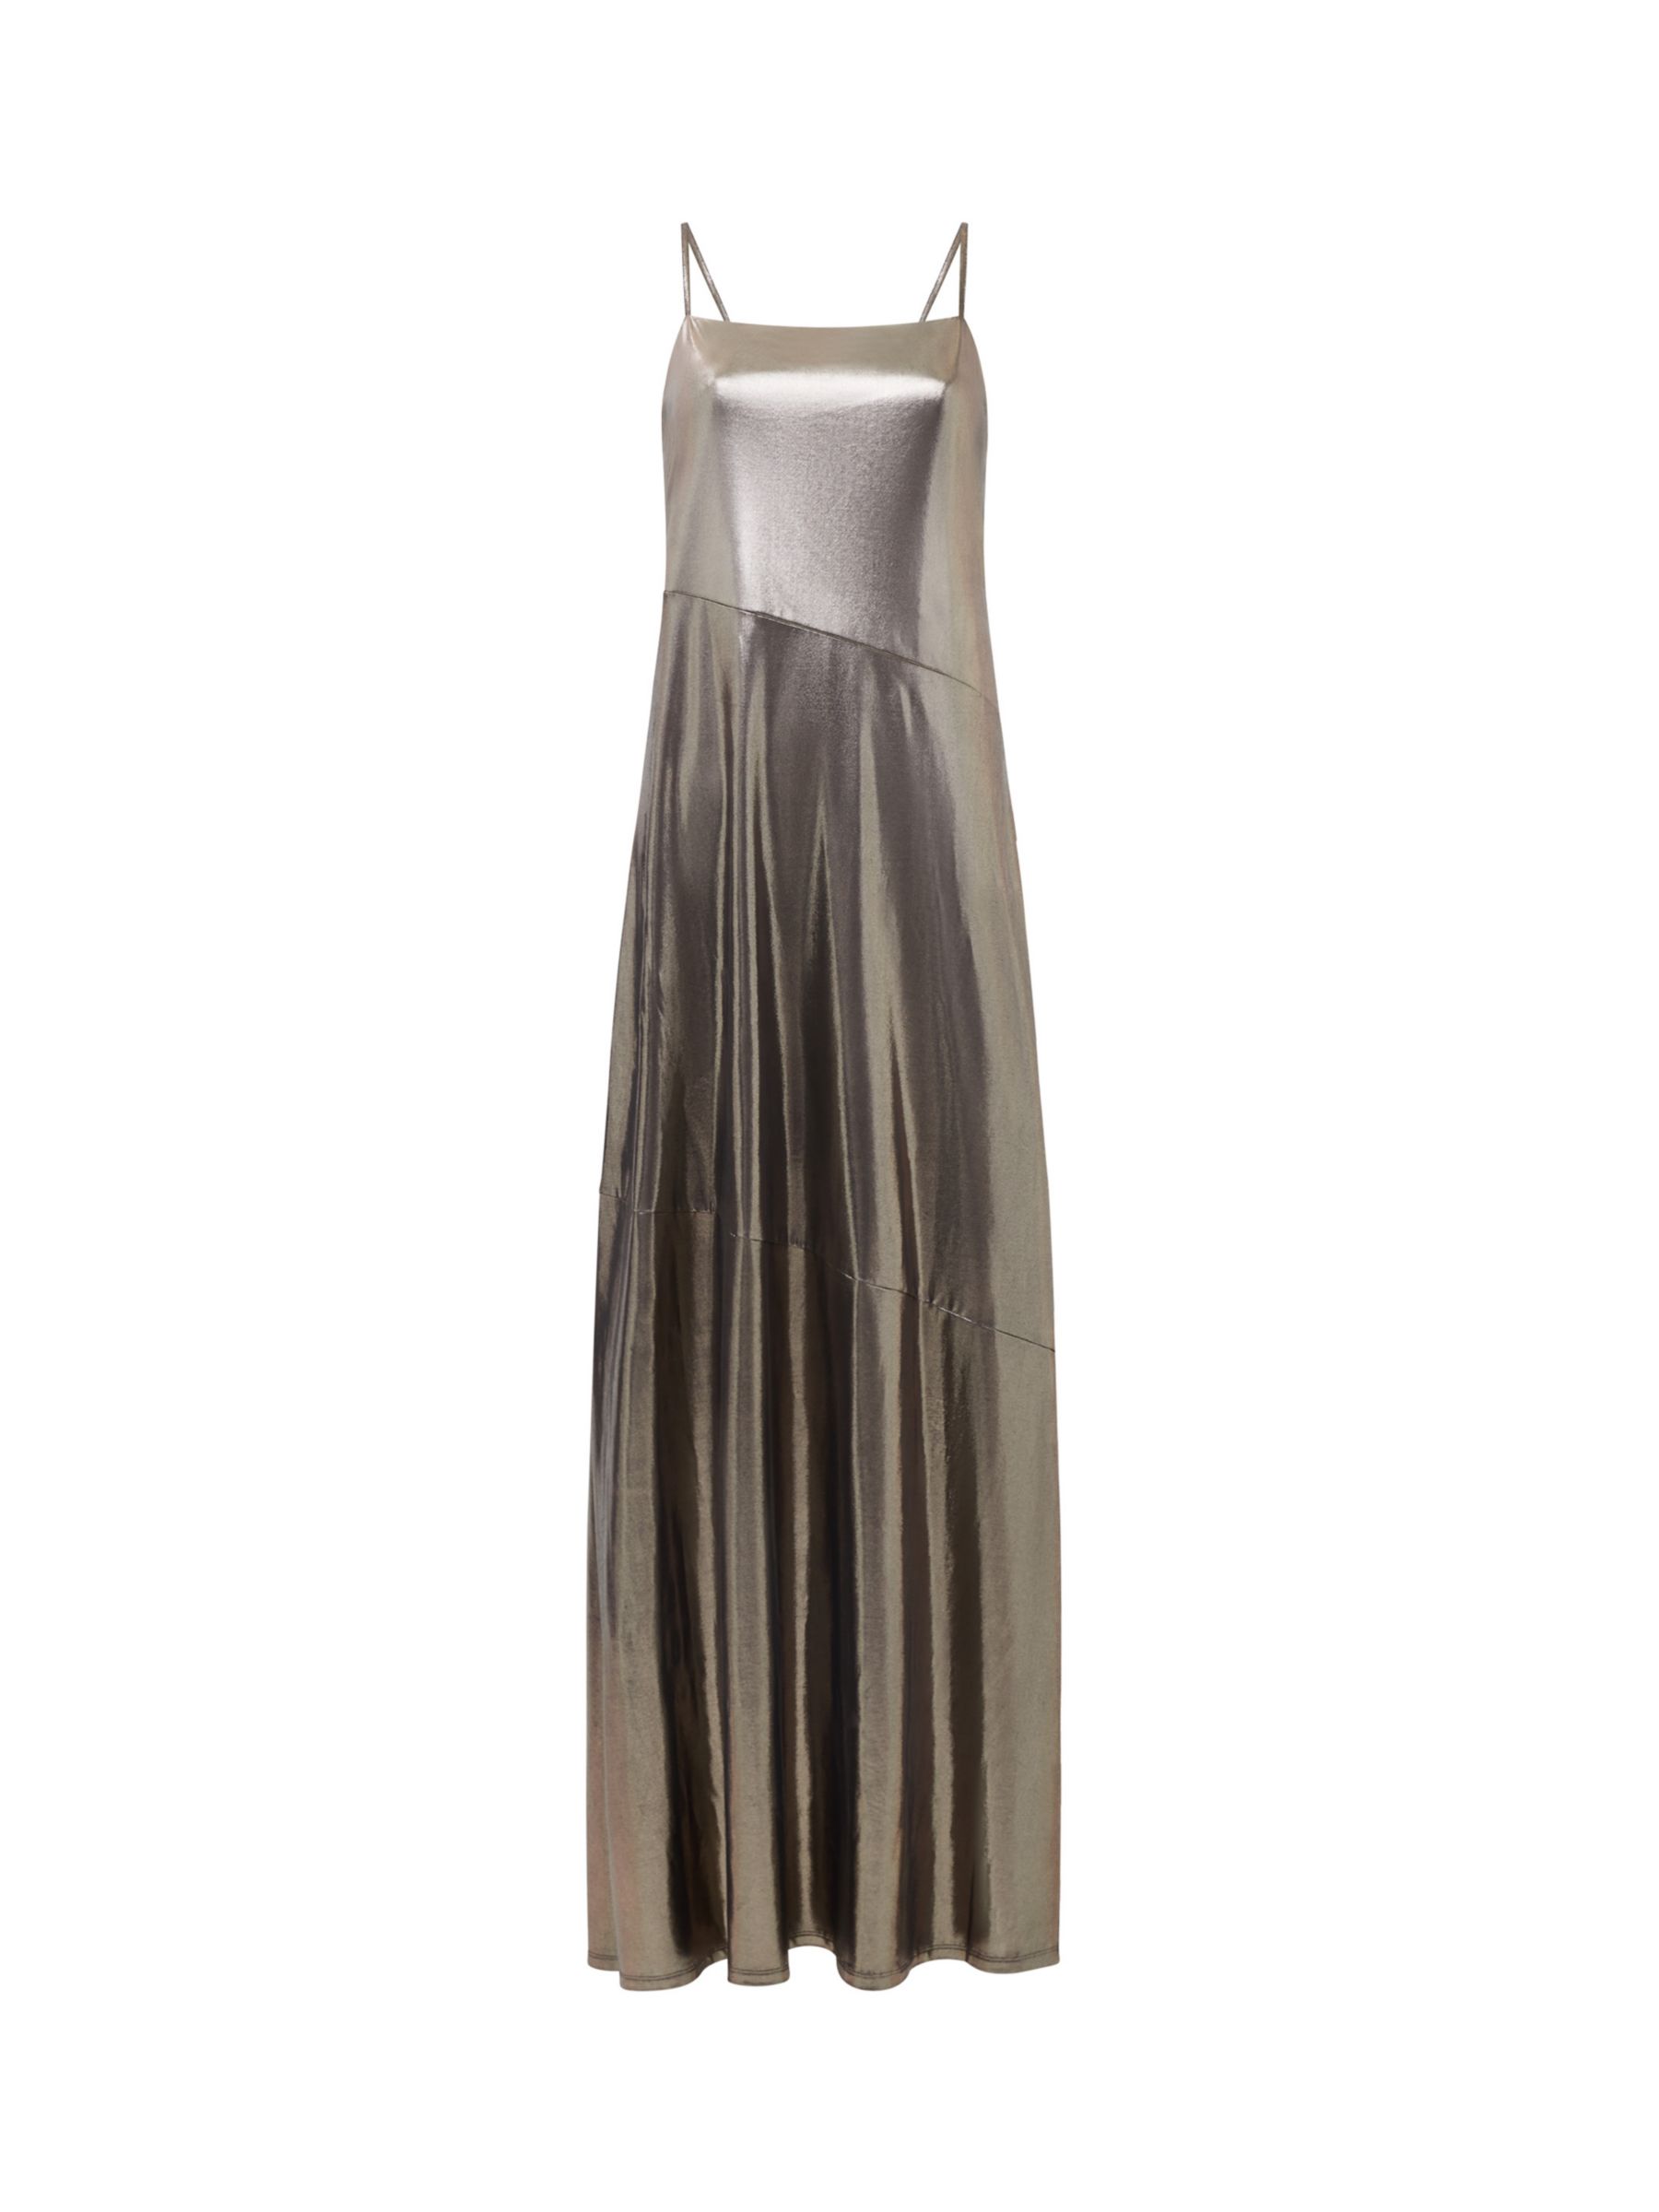 French Connection Ronja Liquid Metal Slip Maxi Dress, Silver, 10